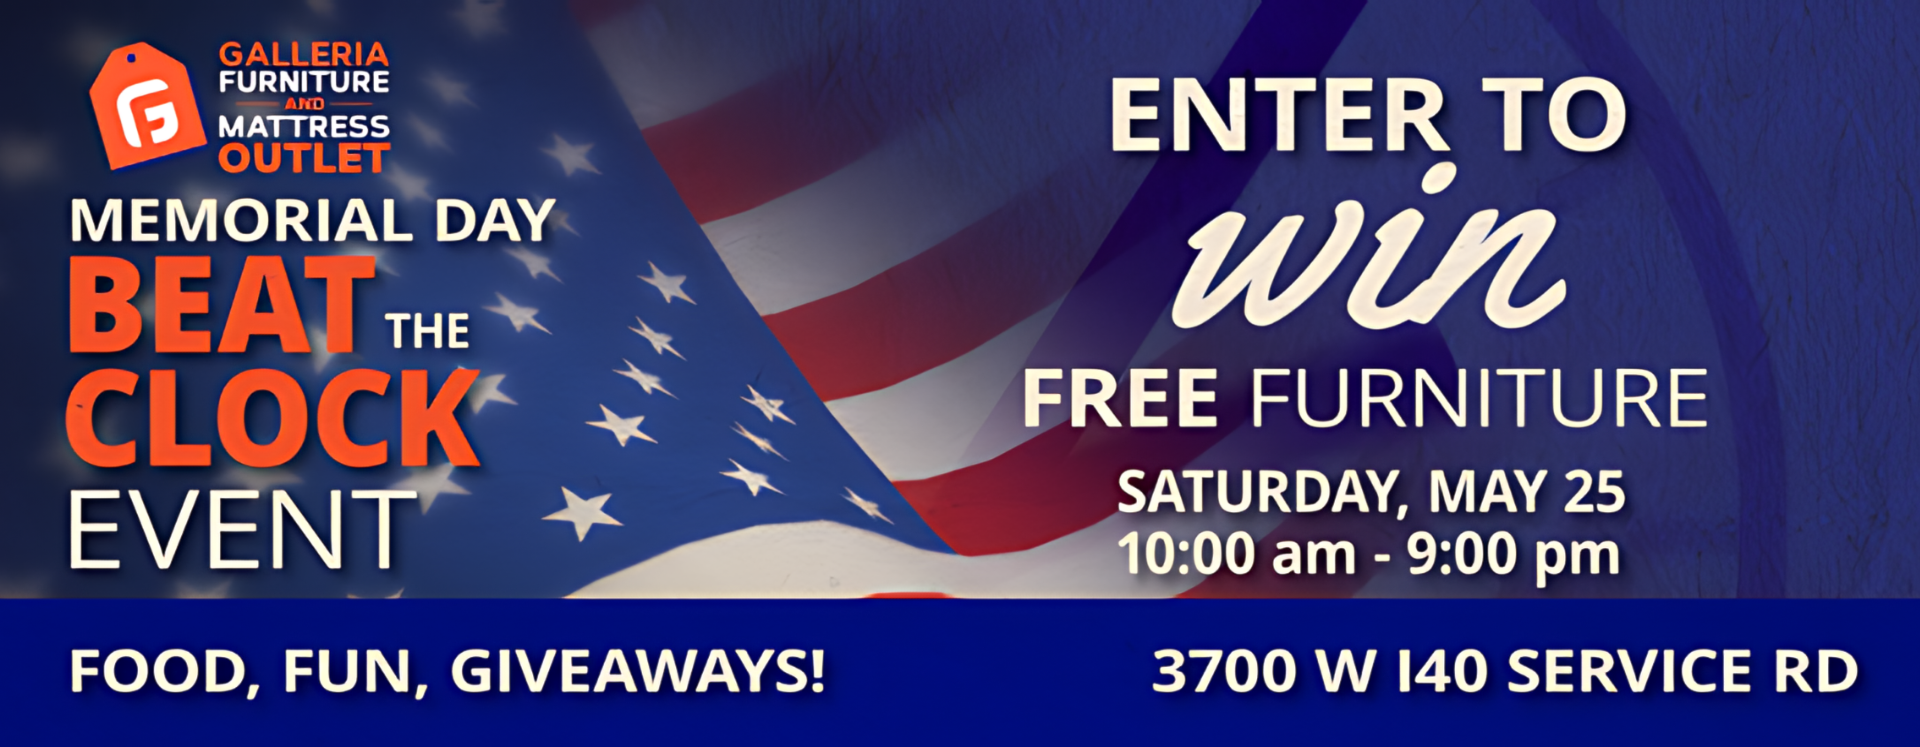 Memorial Day Beat the Clock Event
Enter to Win Free Furniture
Saturday, May 25 10:00am-9:00pm
Food, Fun, Giveaways! 
3700 W I40 Service Rd